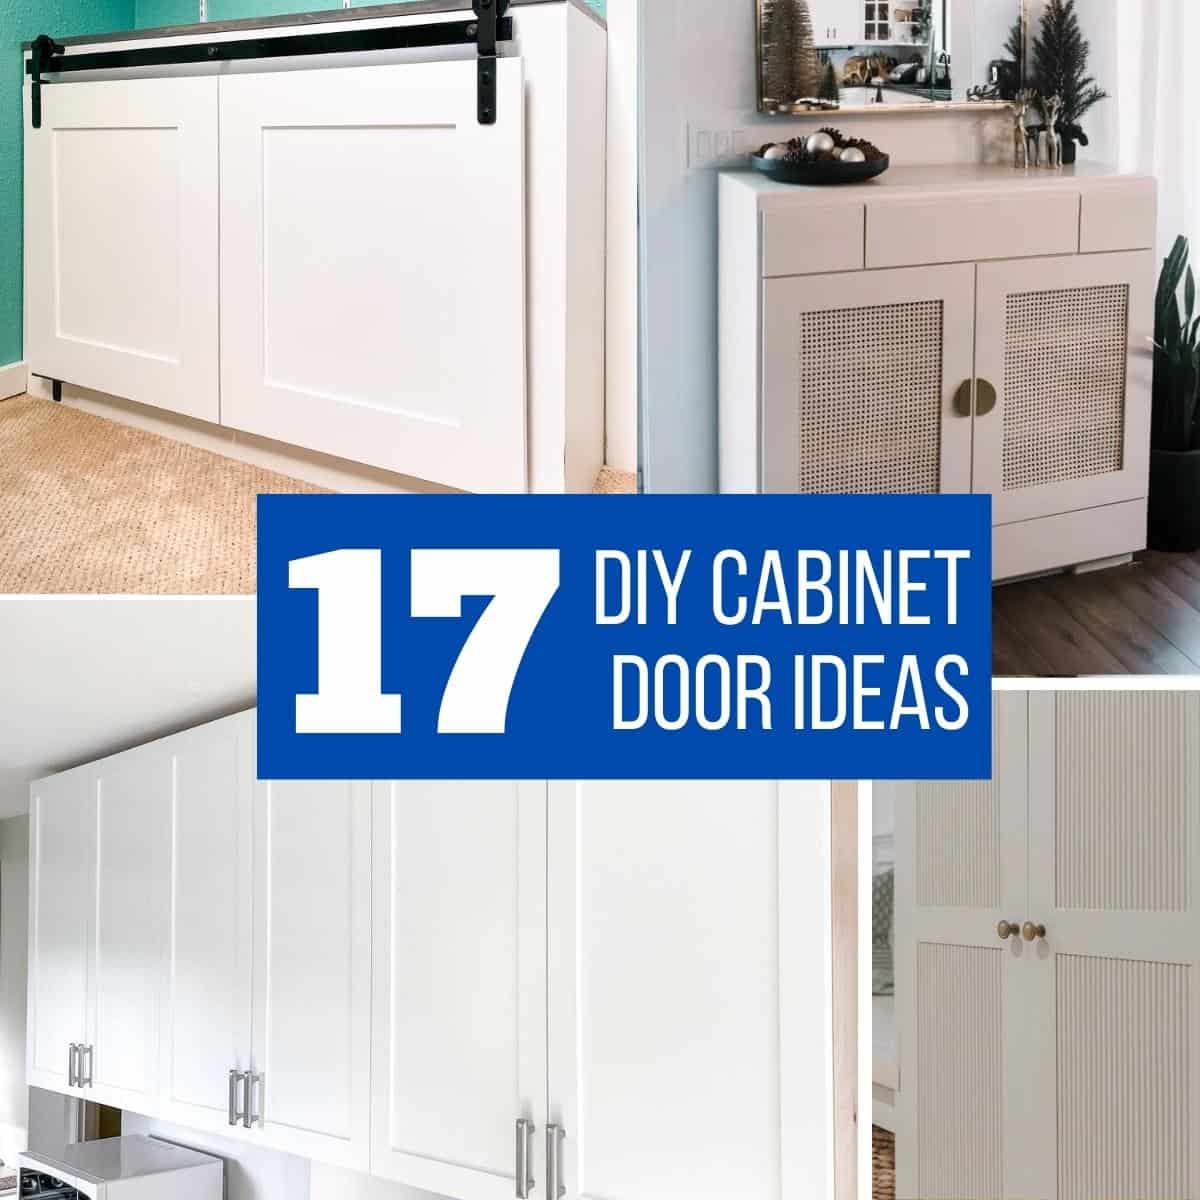 Making Acrylic Cabinetry